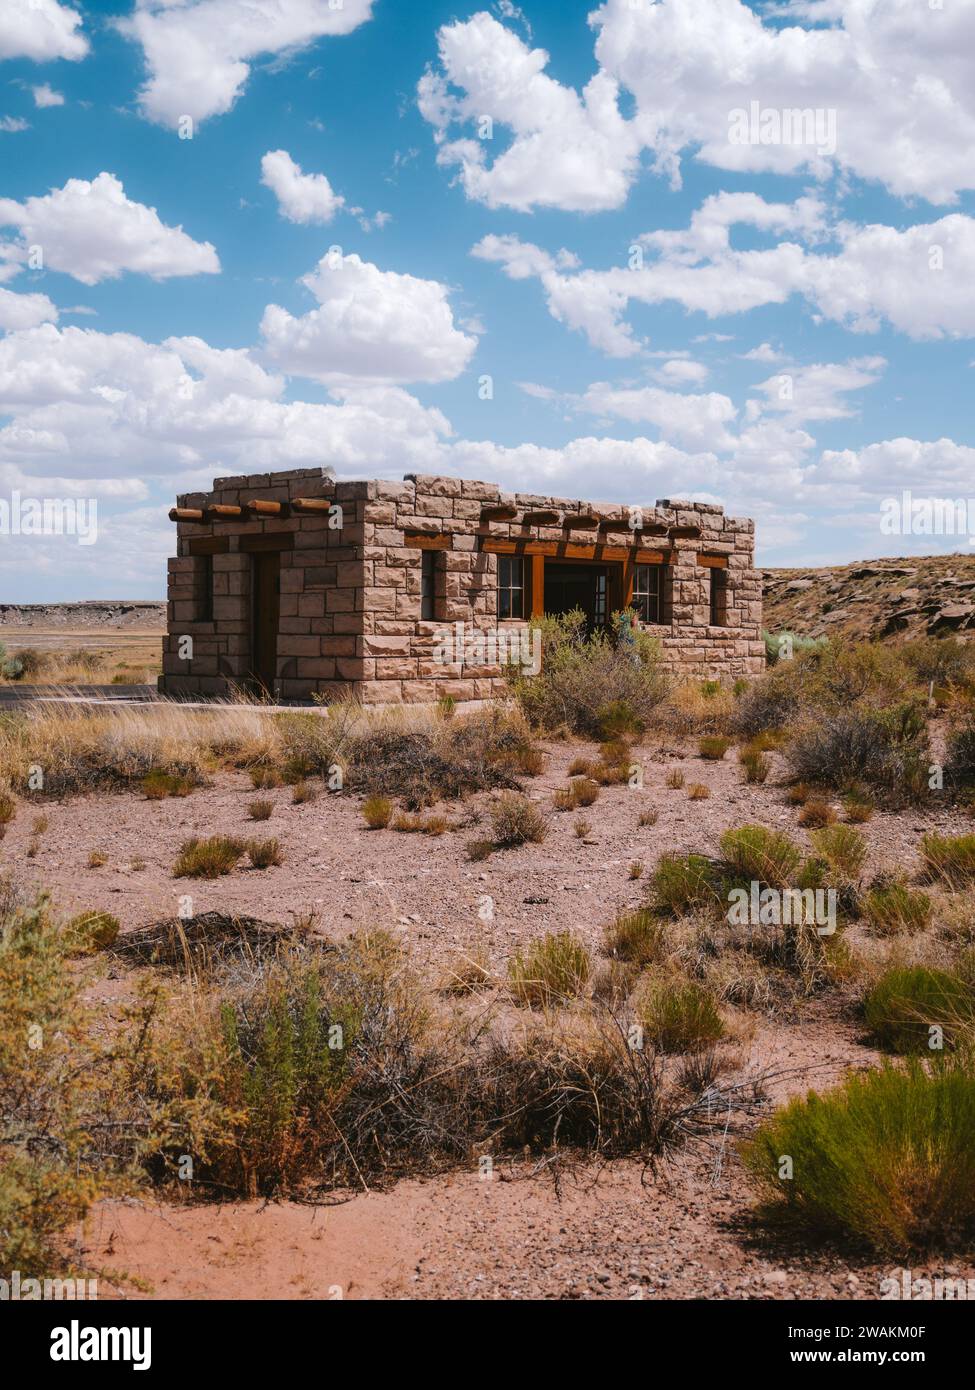 An antiquated stone house standing alone in the arid desert. Stock Photo